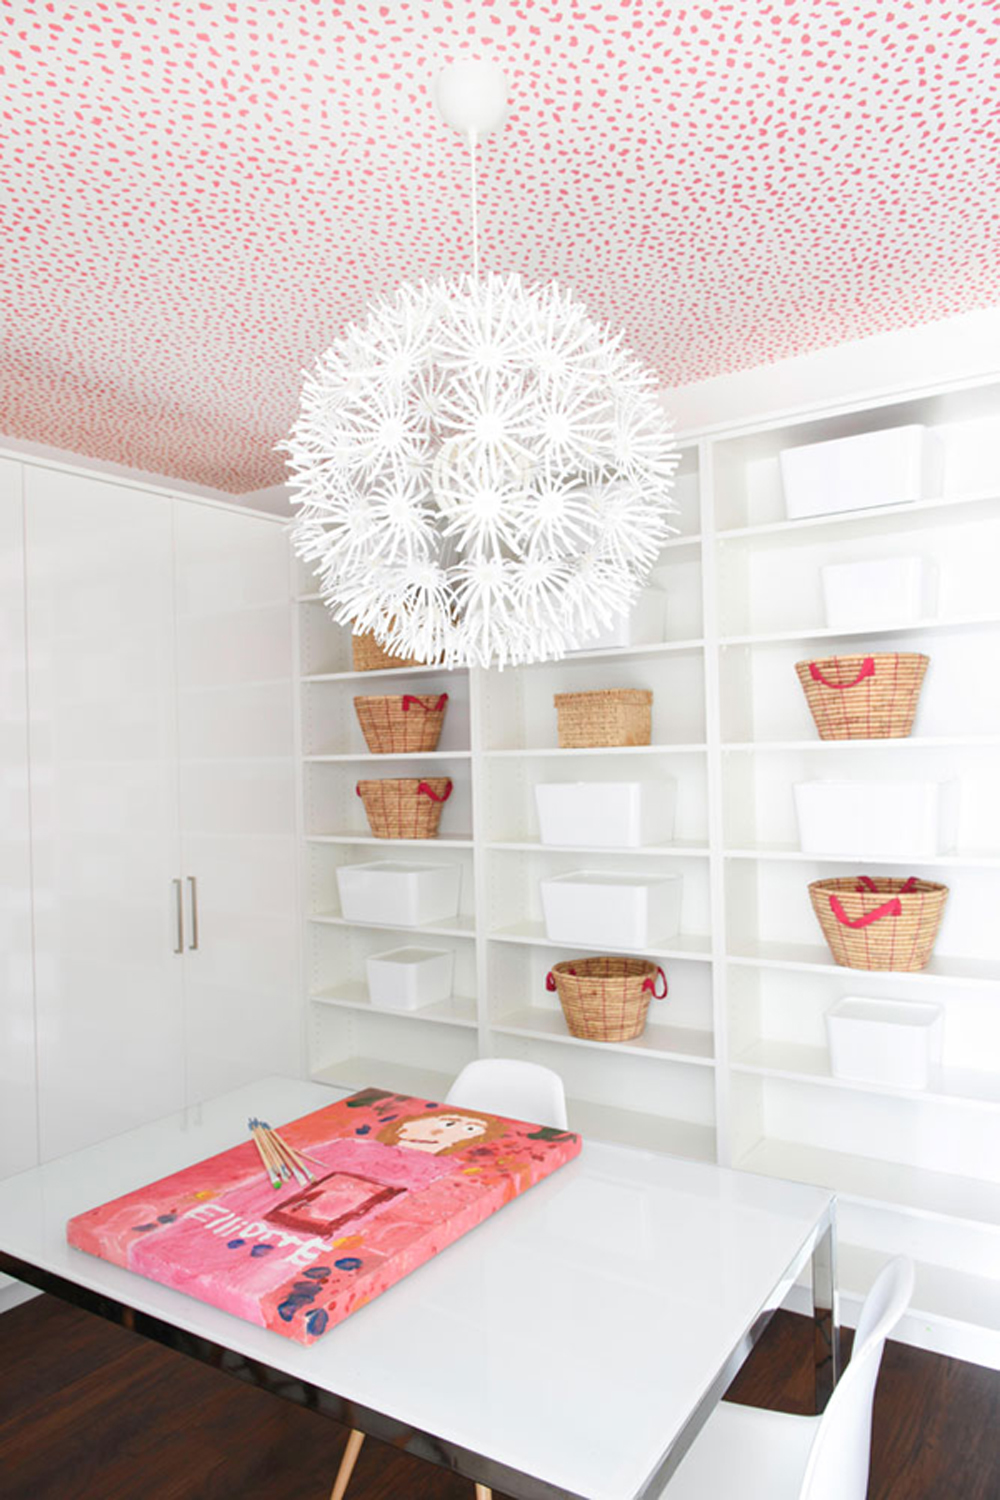 A pink and white wallpapered ceiling in a crafts room